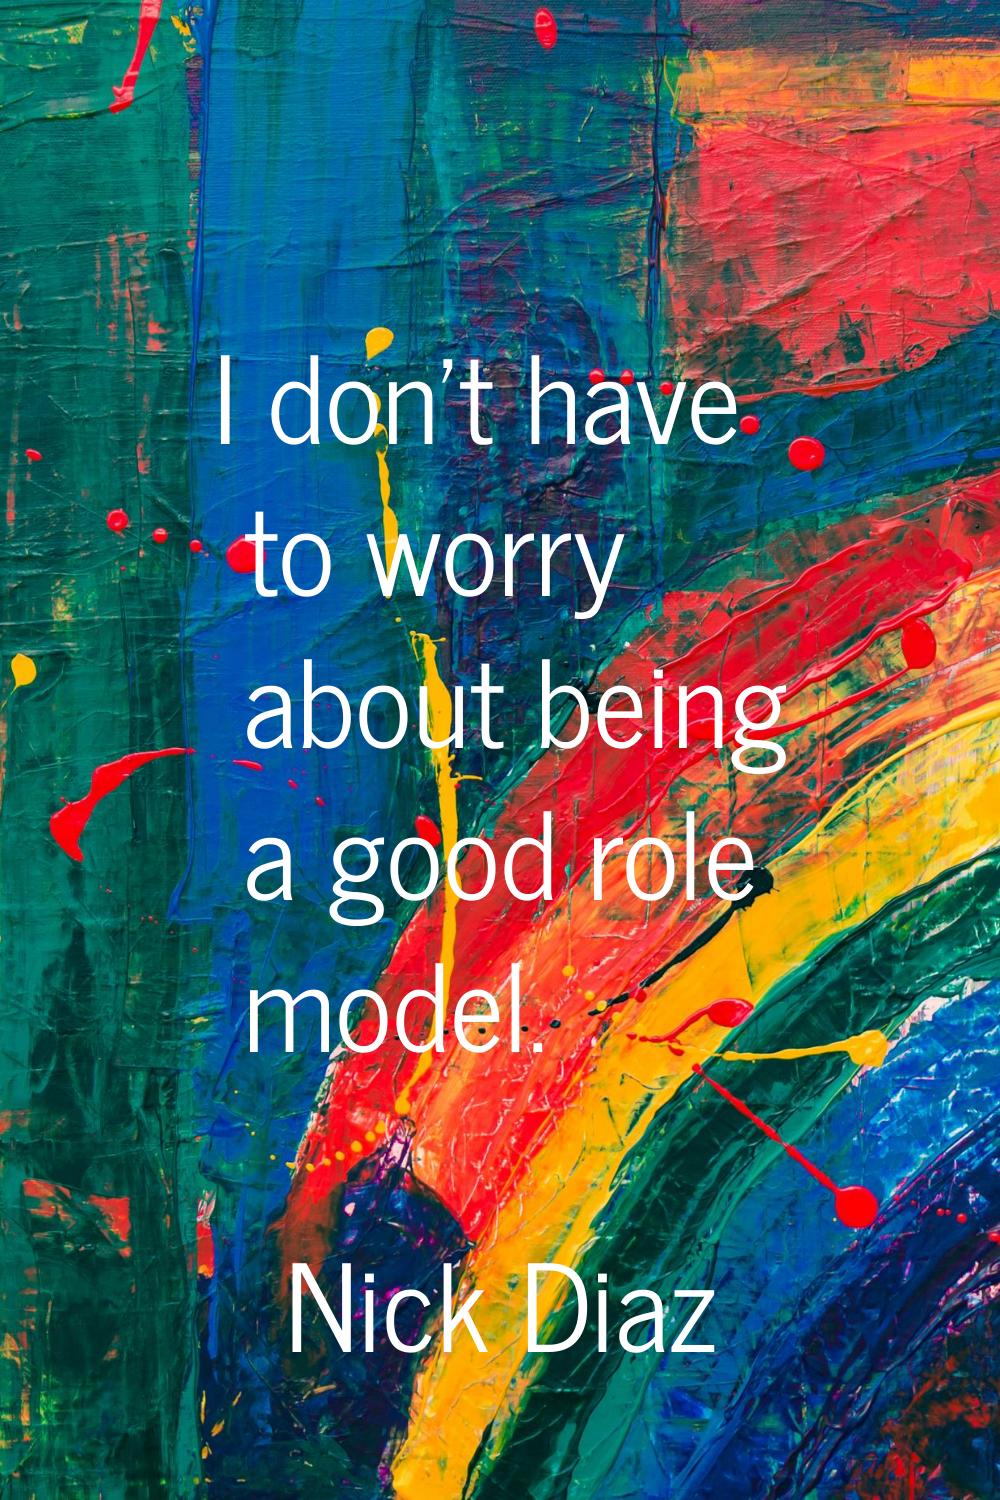 I don't have to worry about being a good role model.